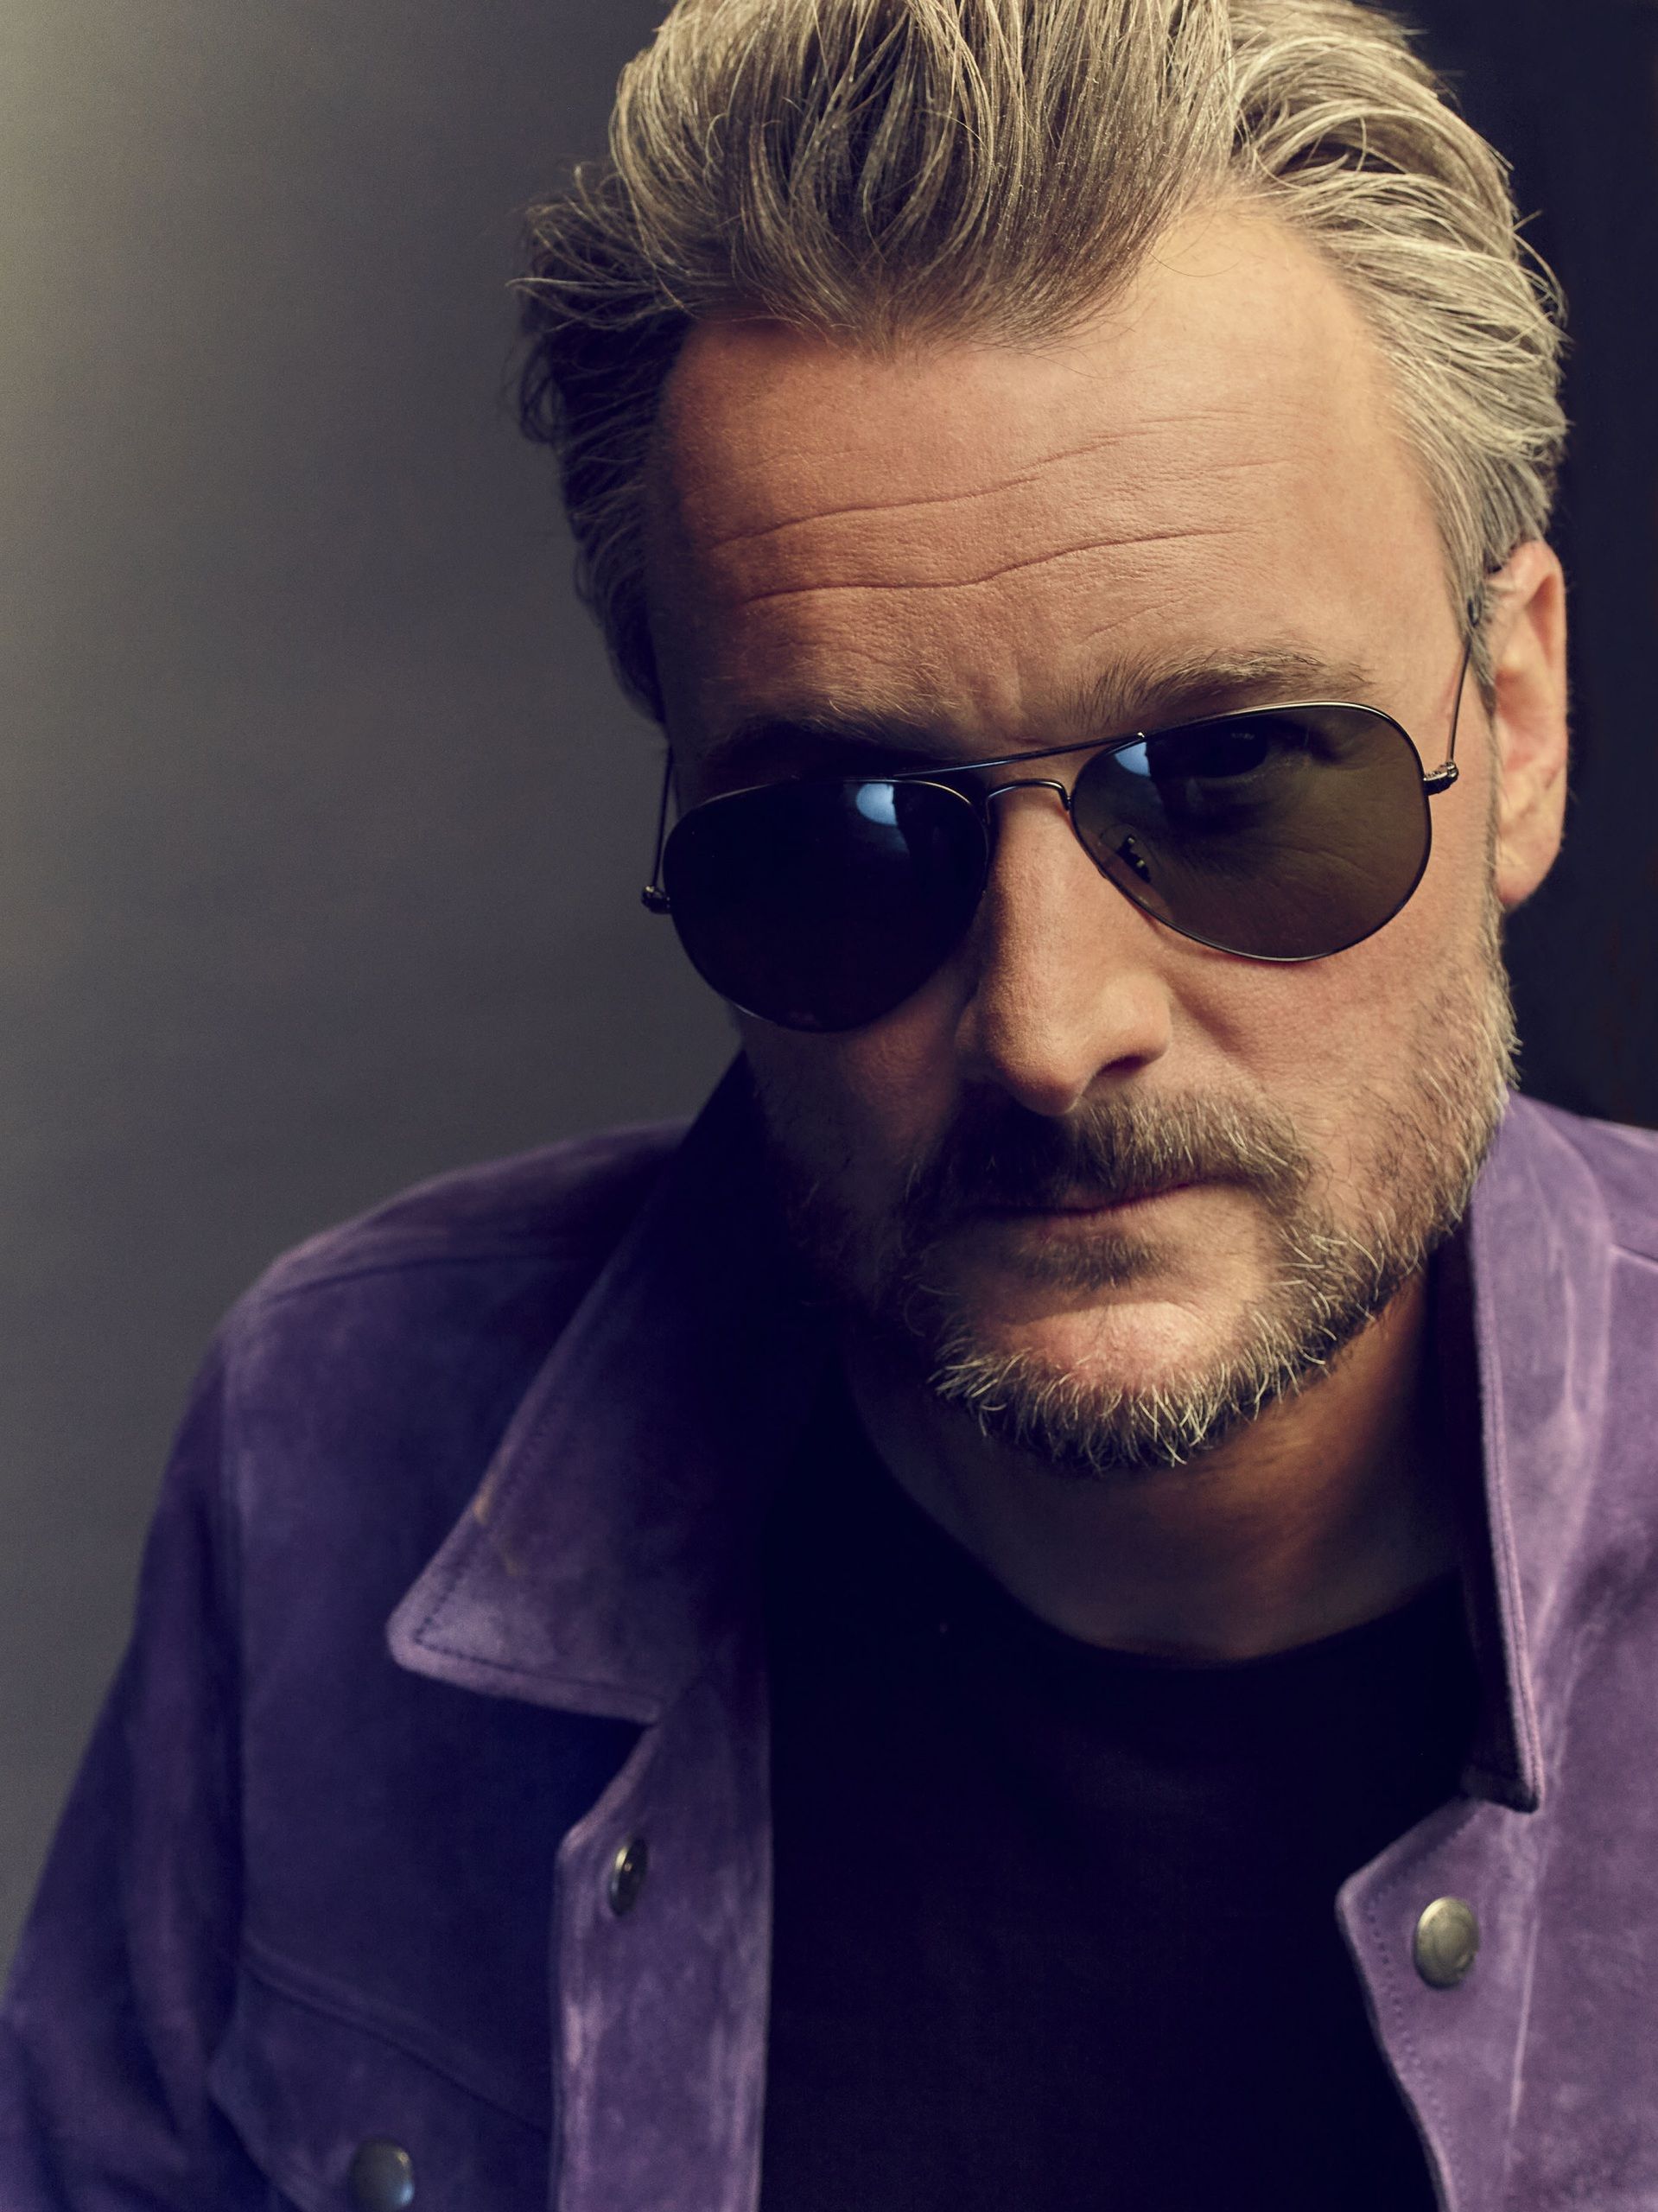 ERIC CHURCH CELEBRATES THE ONE-YEAR ANNIVERSARY OF CRITICALLY ACCLAIMED HEART & SOUL TRIPLE ALBUM WITH EXCLUSIVE BOX SETS